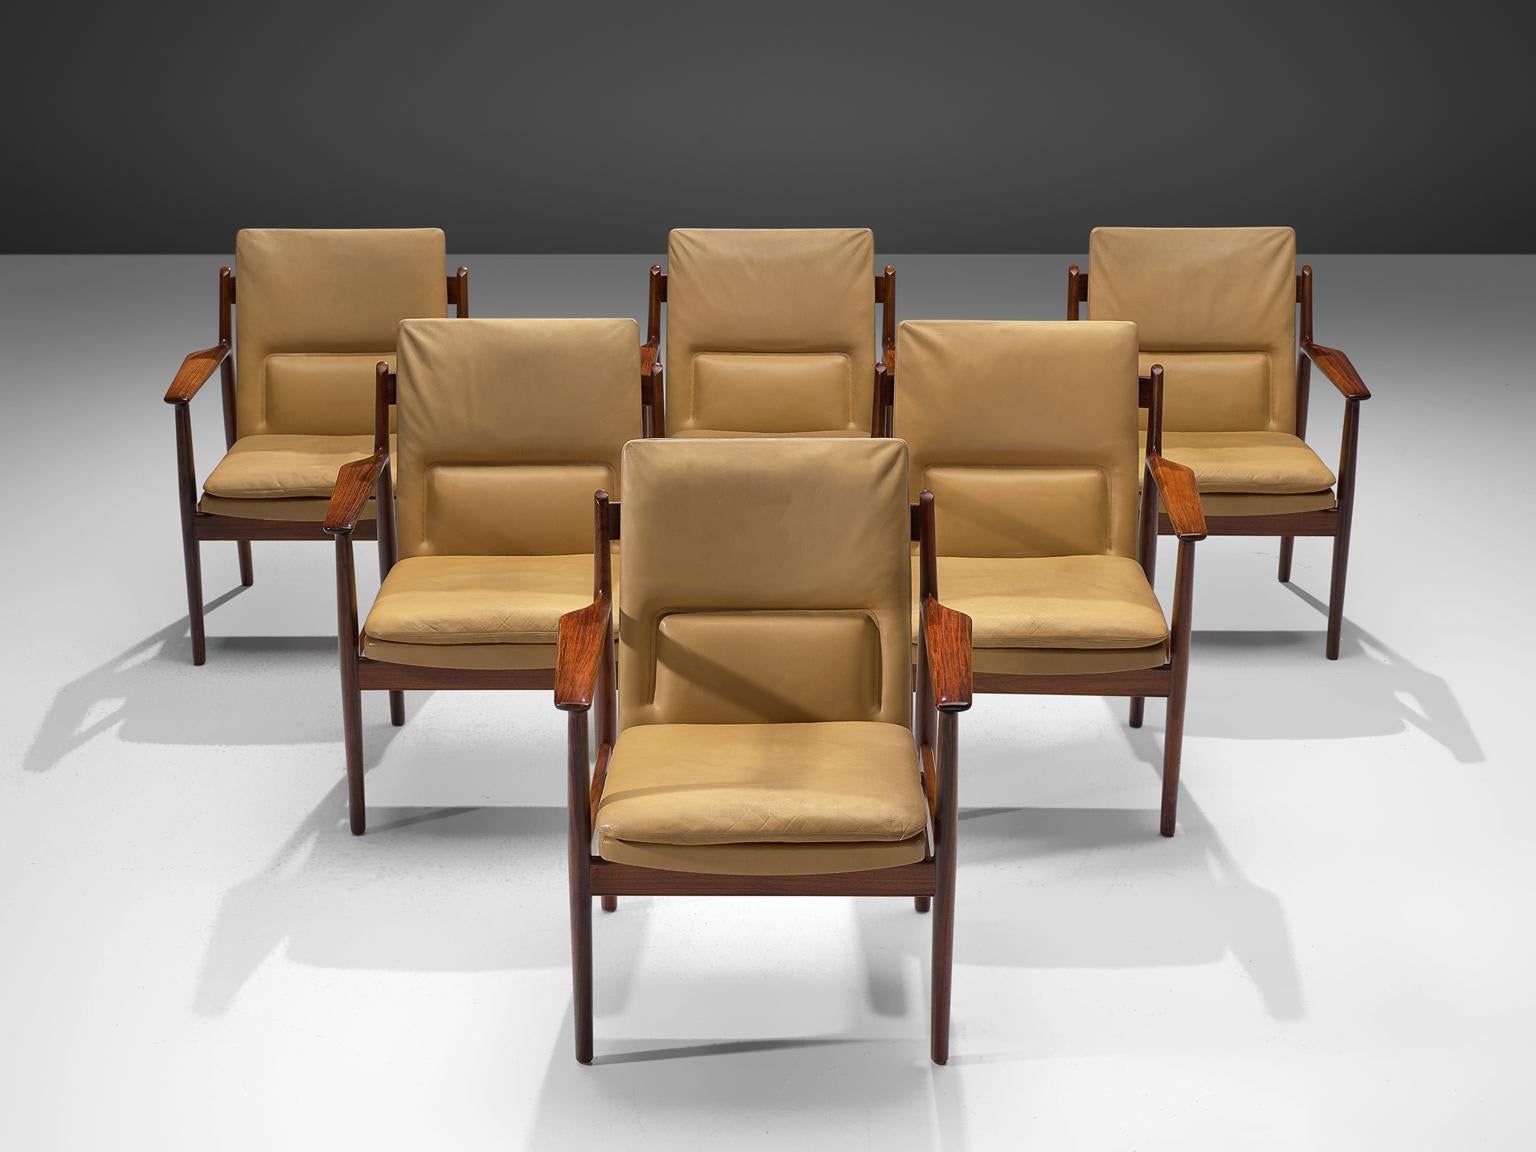 Arne Vodder for Sibast, armchairs model 431, rosewood and natural colored leather, Denmark, 1960s.

This set of 6 chairs is executed in original beige leather and rosewood, designed by the Danish designer Arne Vodder. These chairs are good